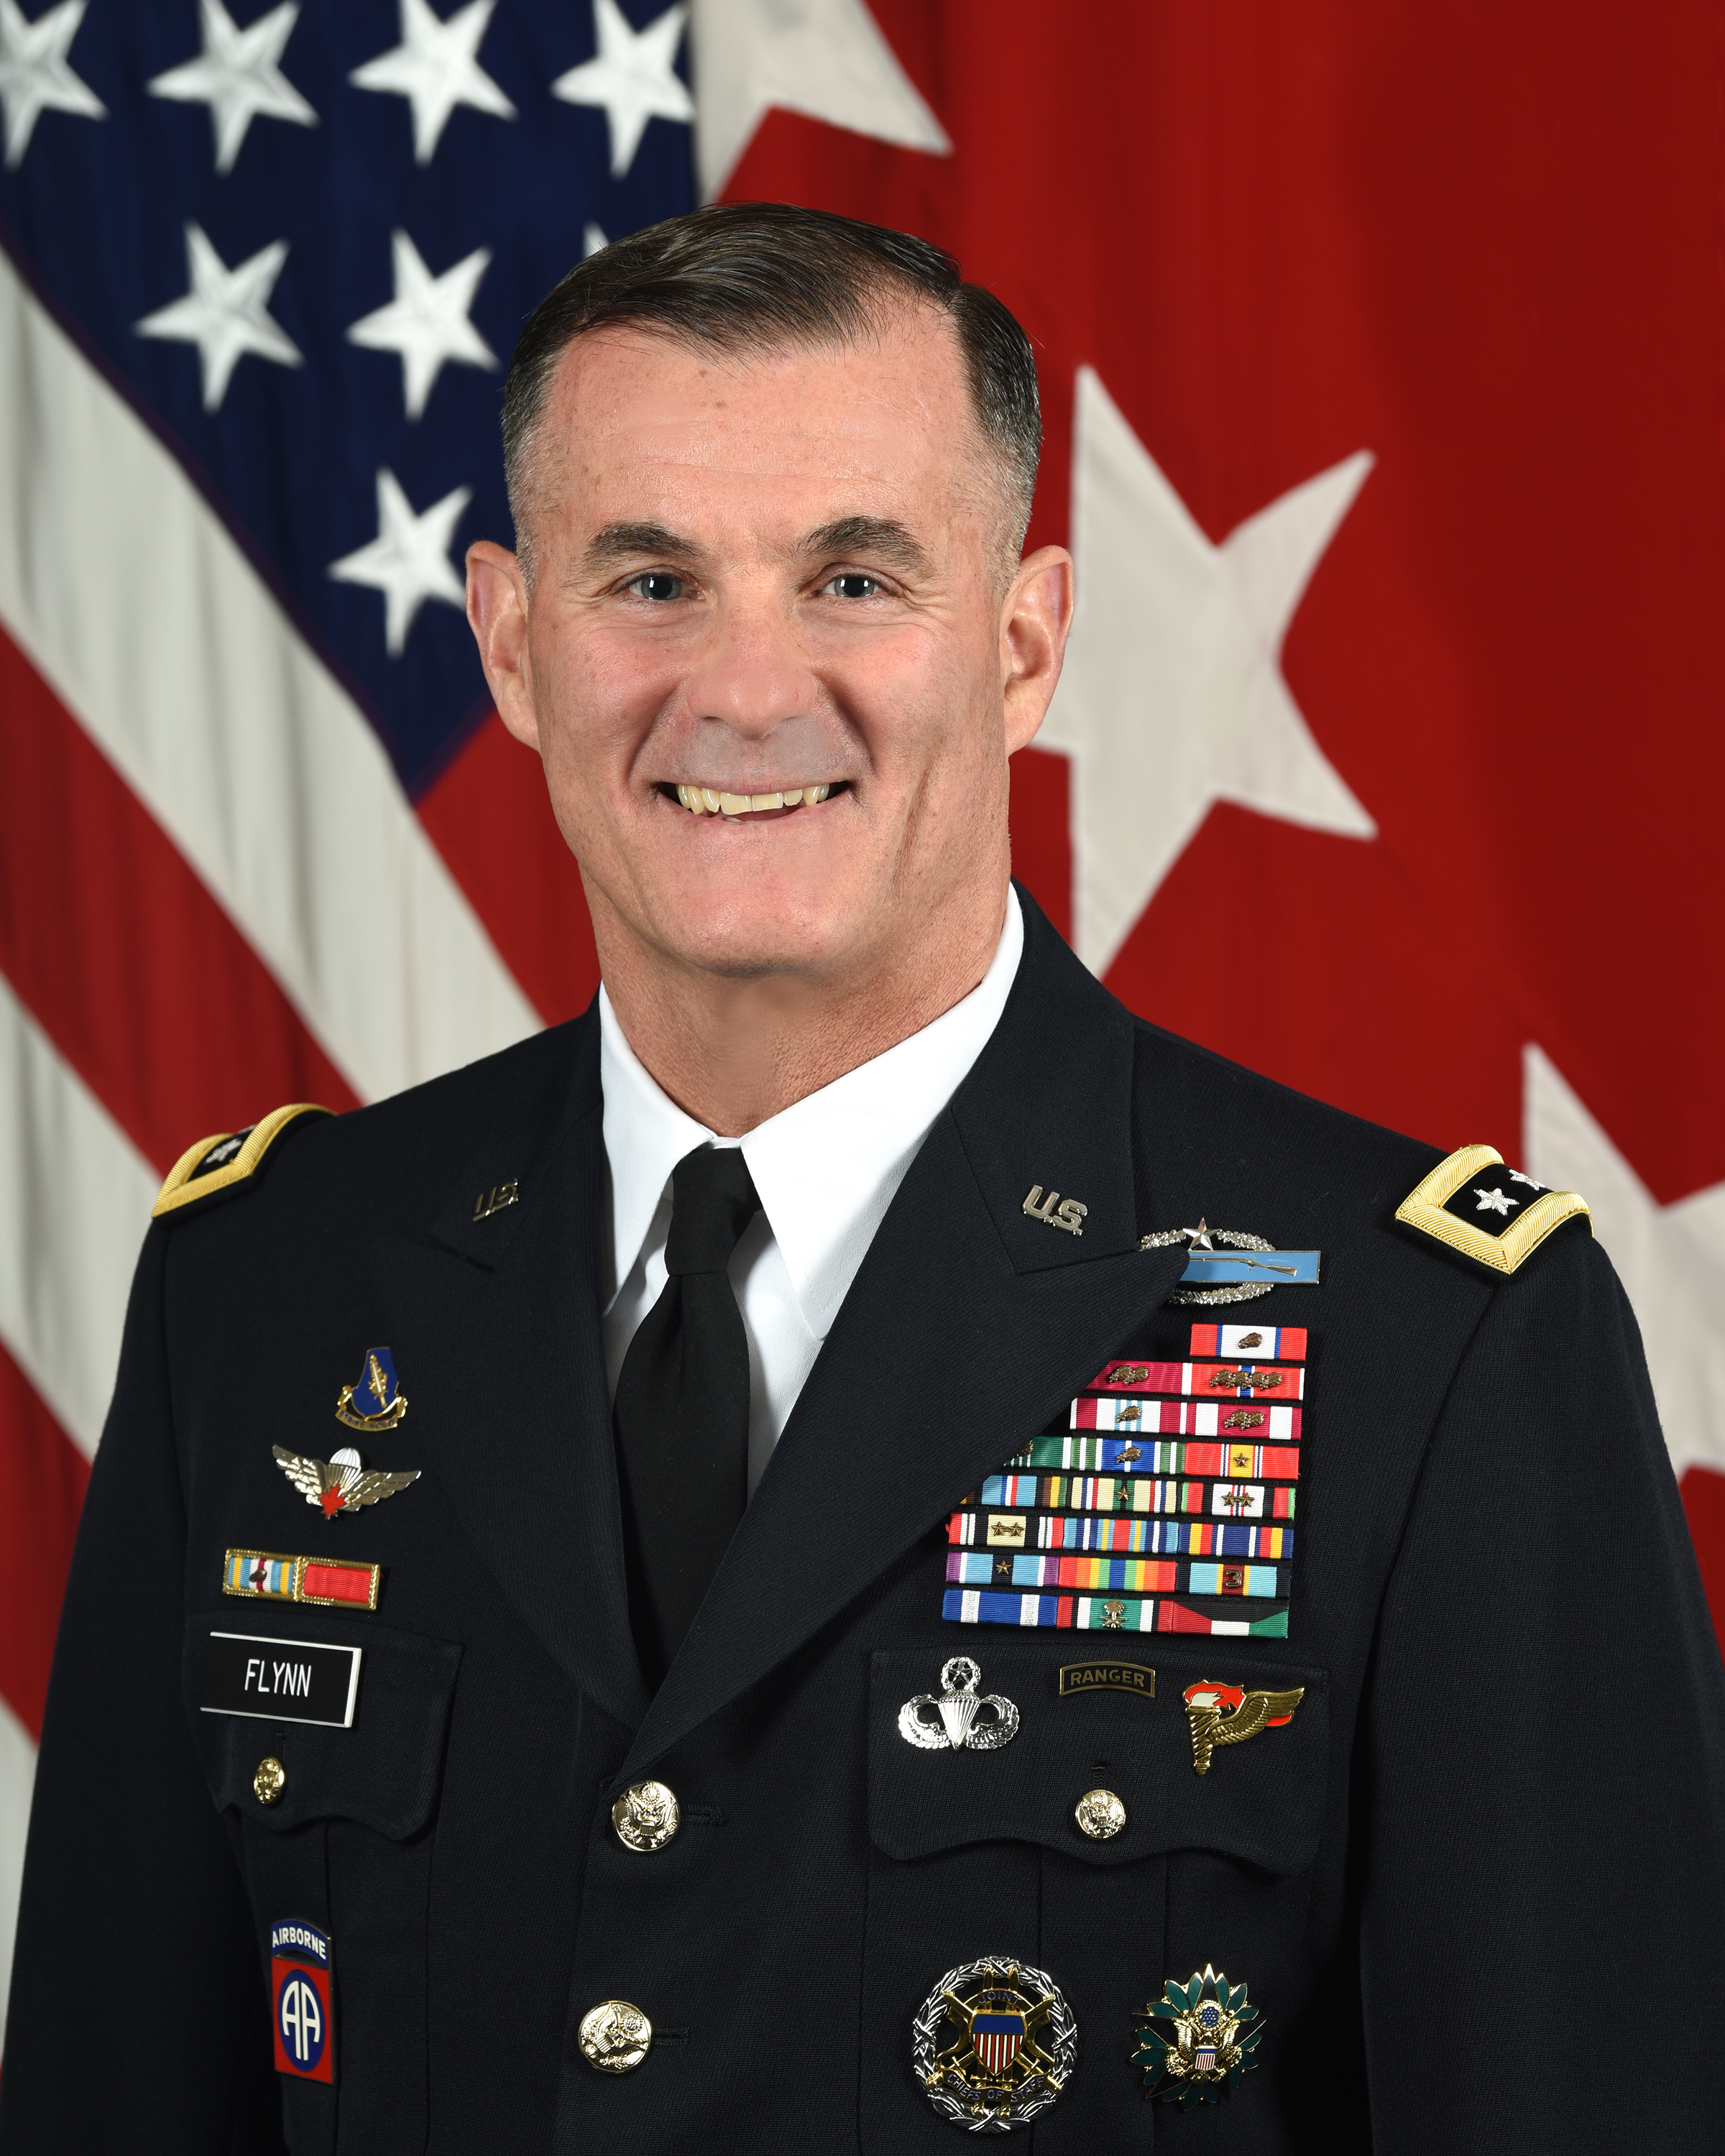 General Charles A. Flynn is coming to Nepal on a four-day visit